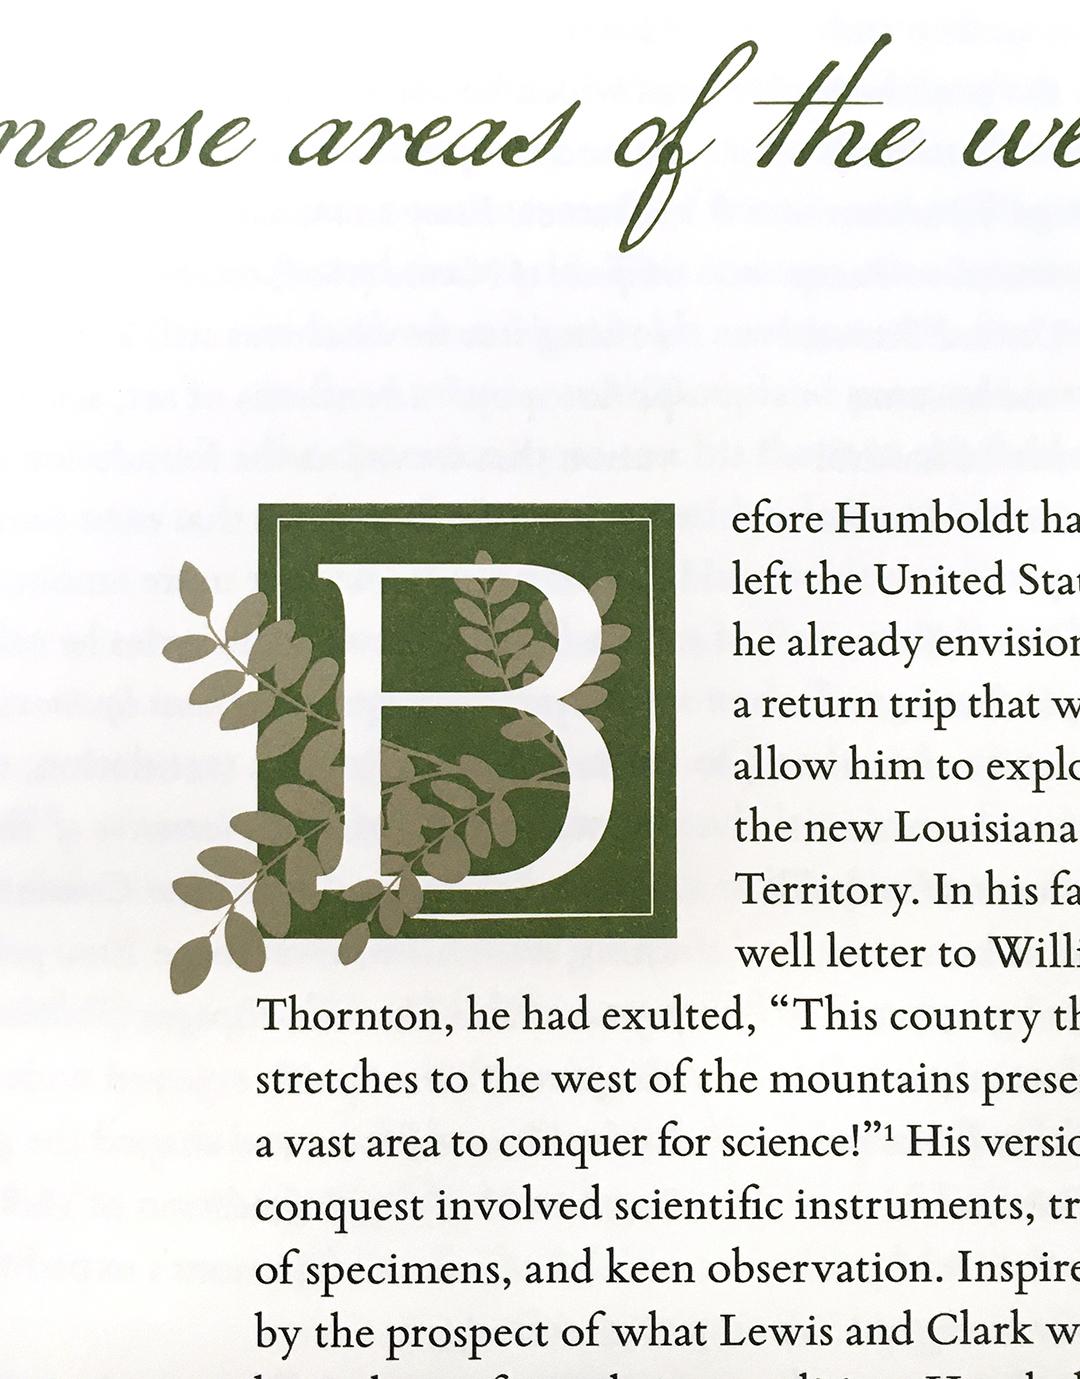 A picture inside a book with the first letter "B" being created from natural elements. 